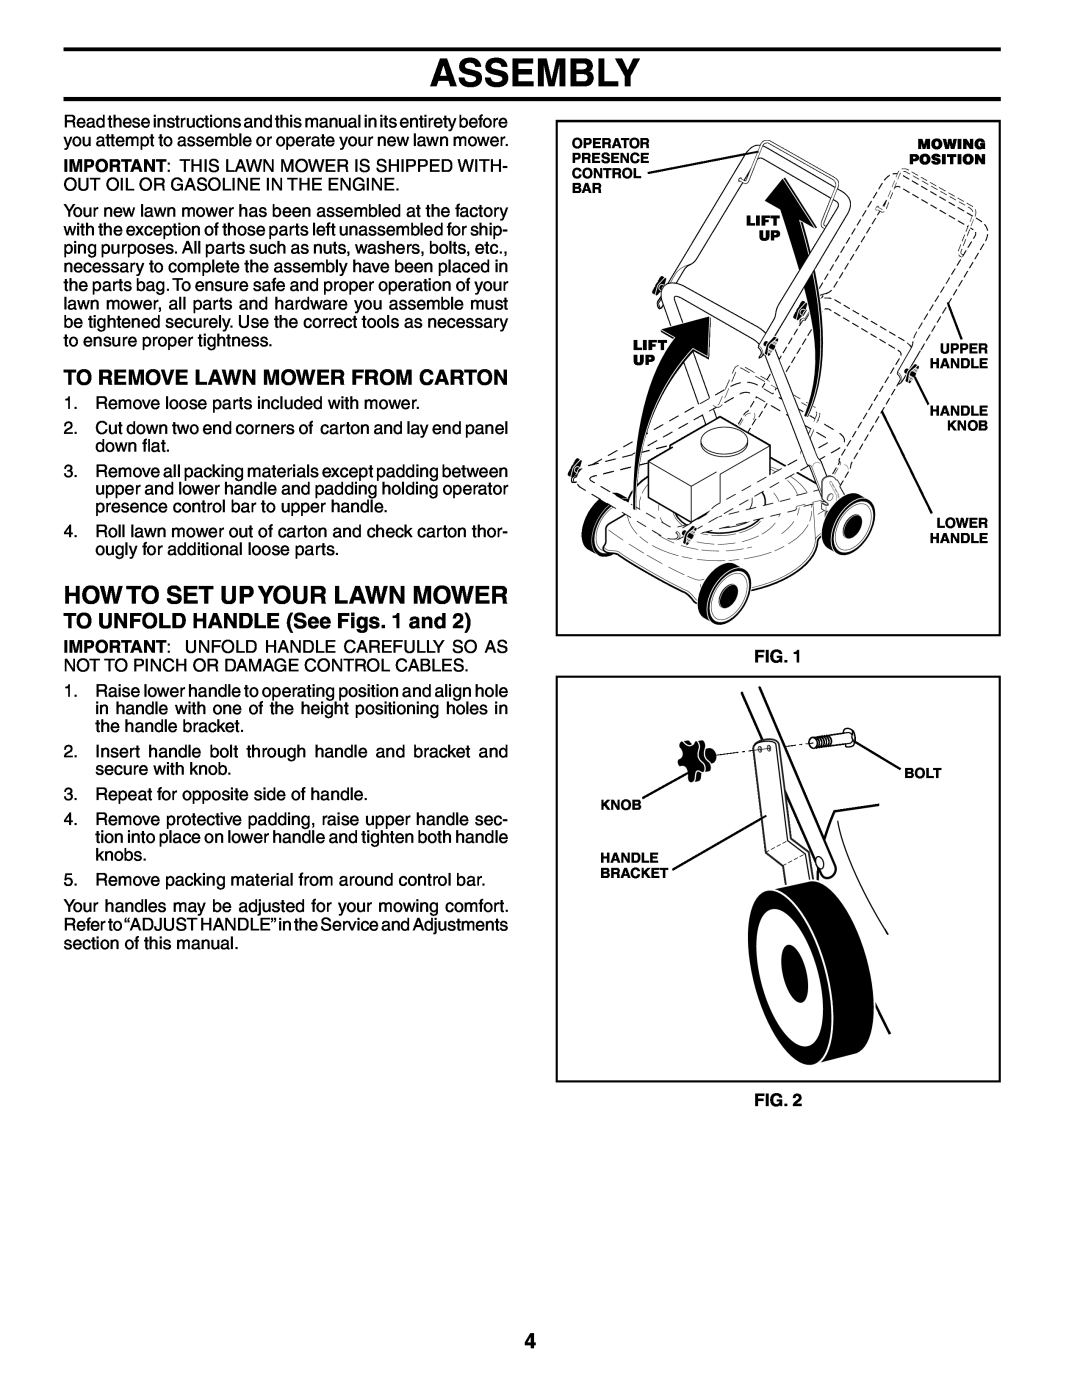 Husqvarna 55R21HV owner manual Assembly, How To Set Up Your Lawn Mower, To Remove Lawn Mower From Carton 